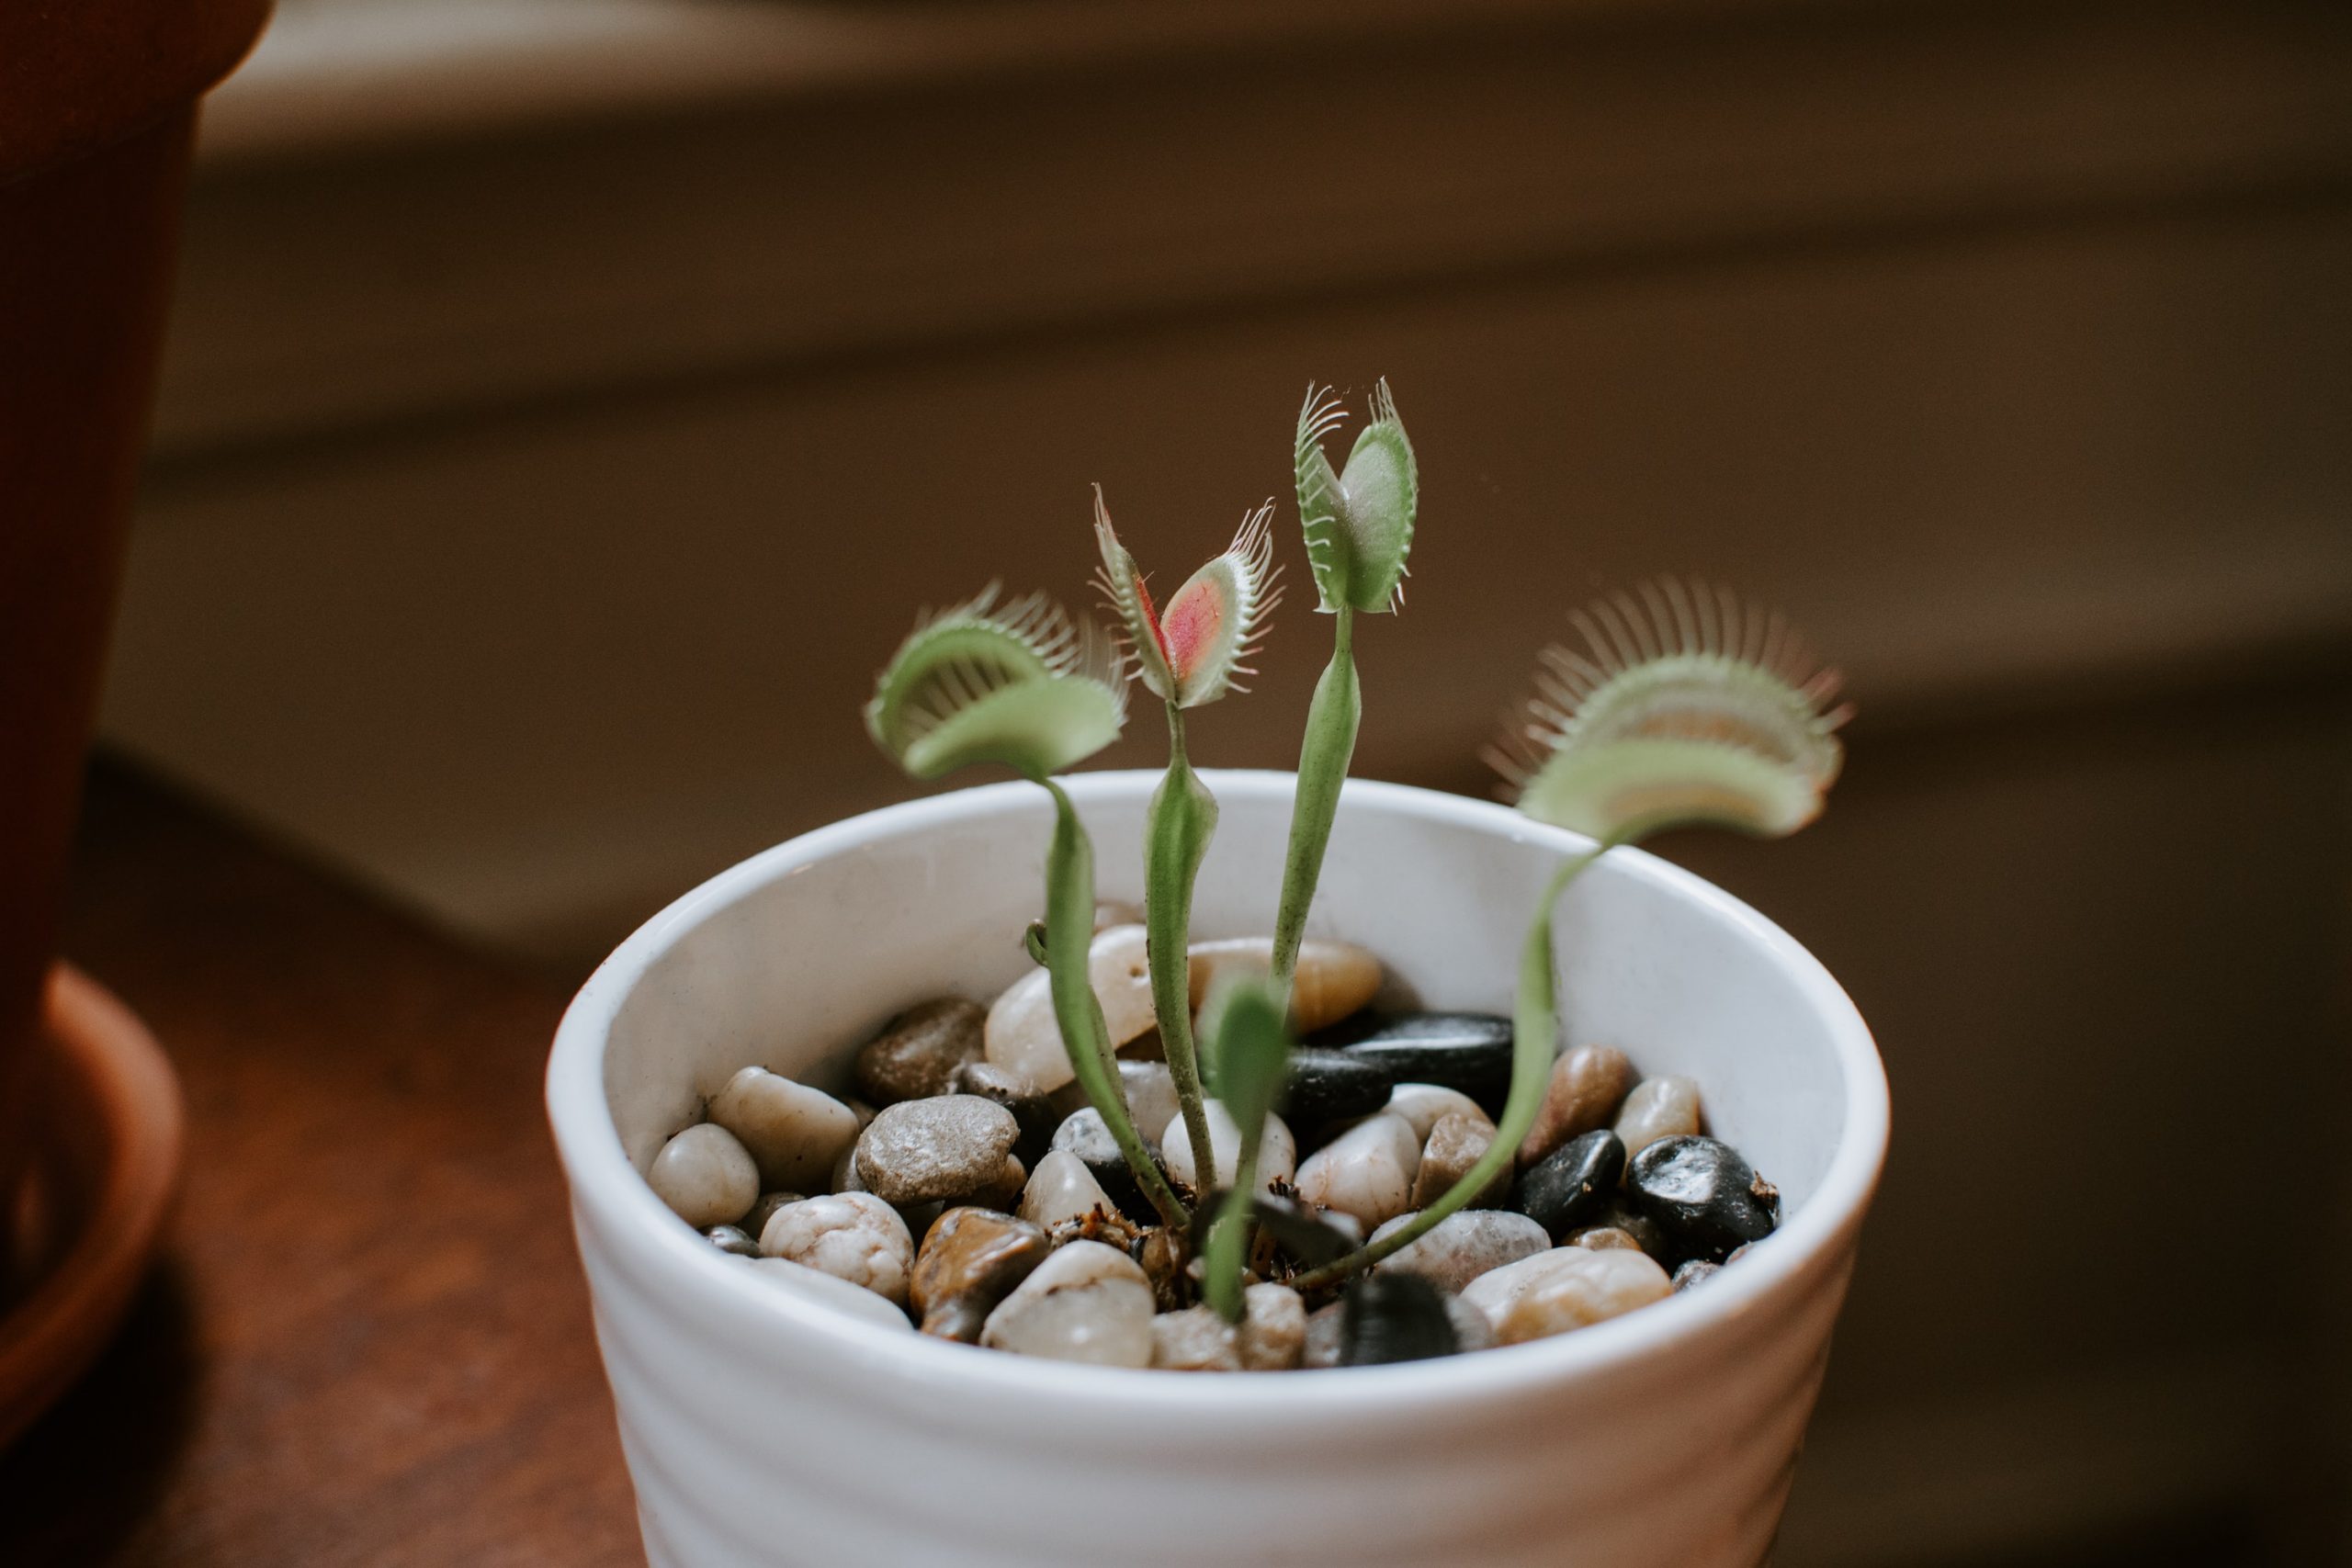 Do Venus Fly Traps Reopen? And How Long Do They Take To Reopen?